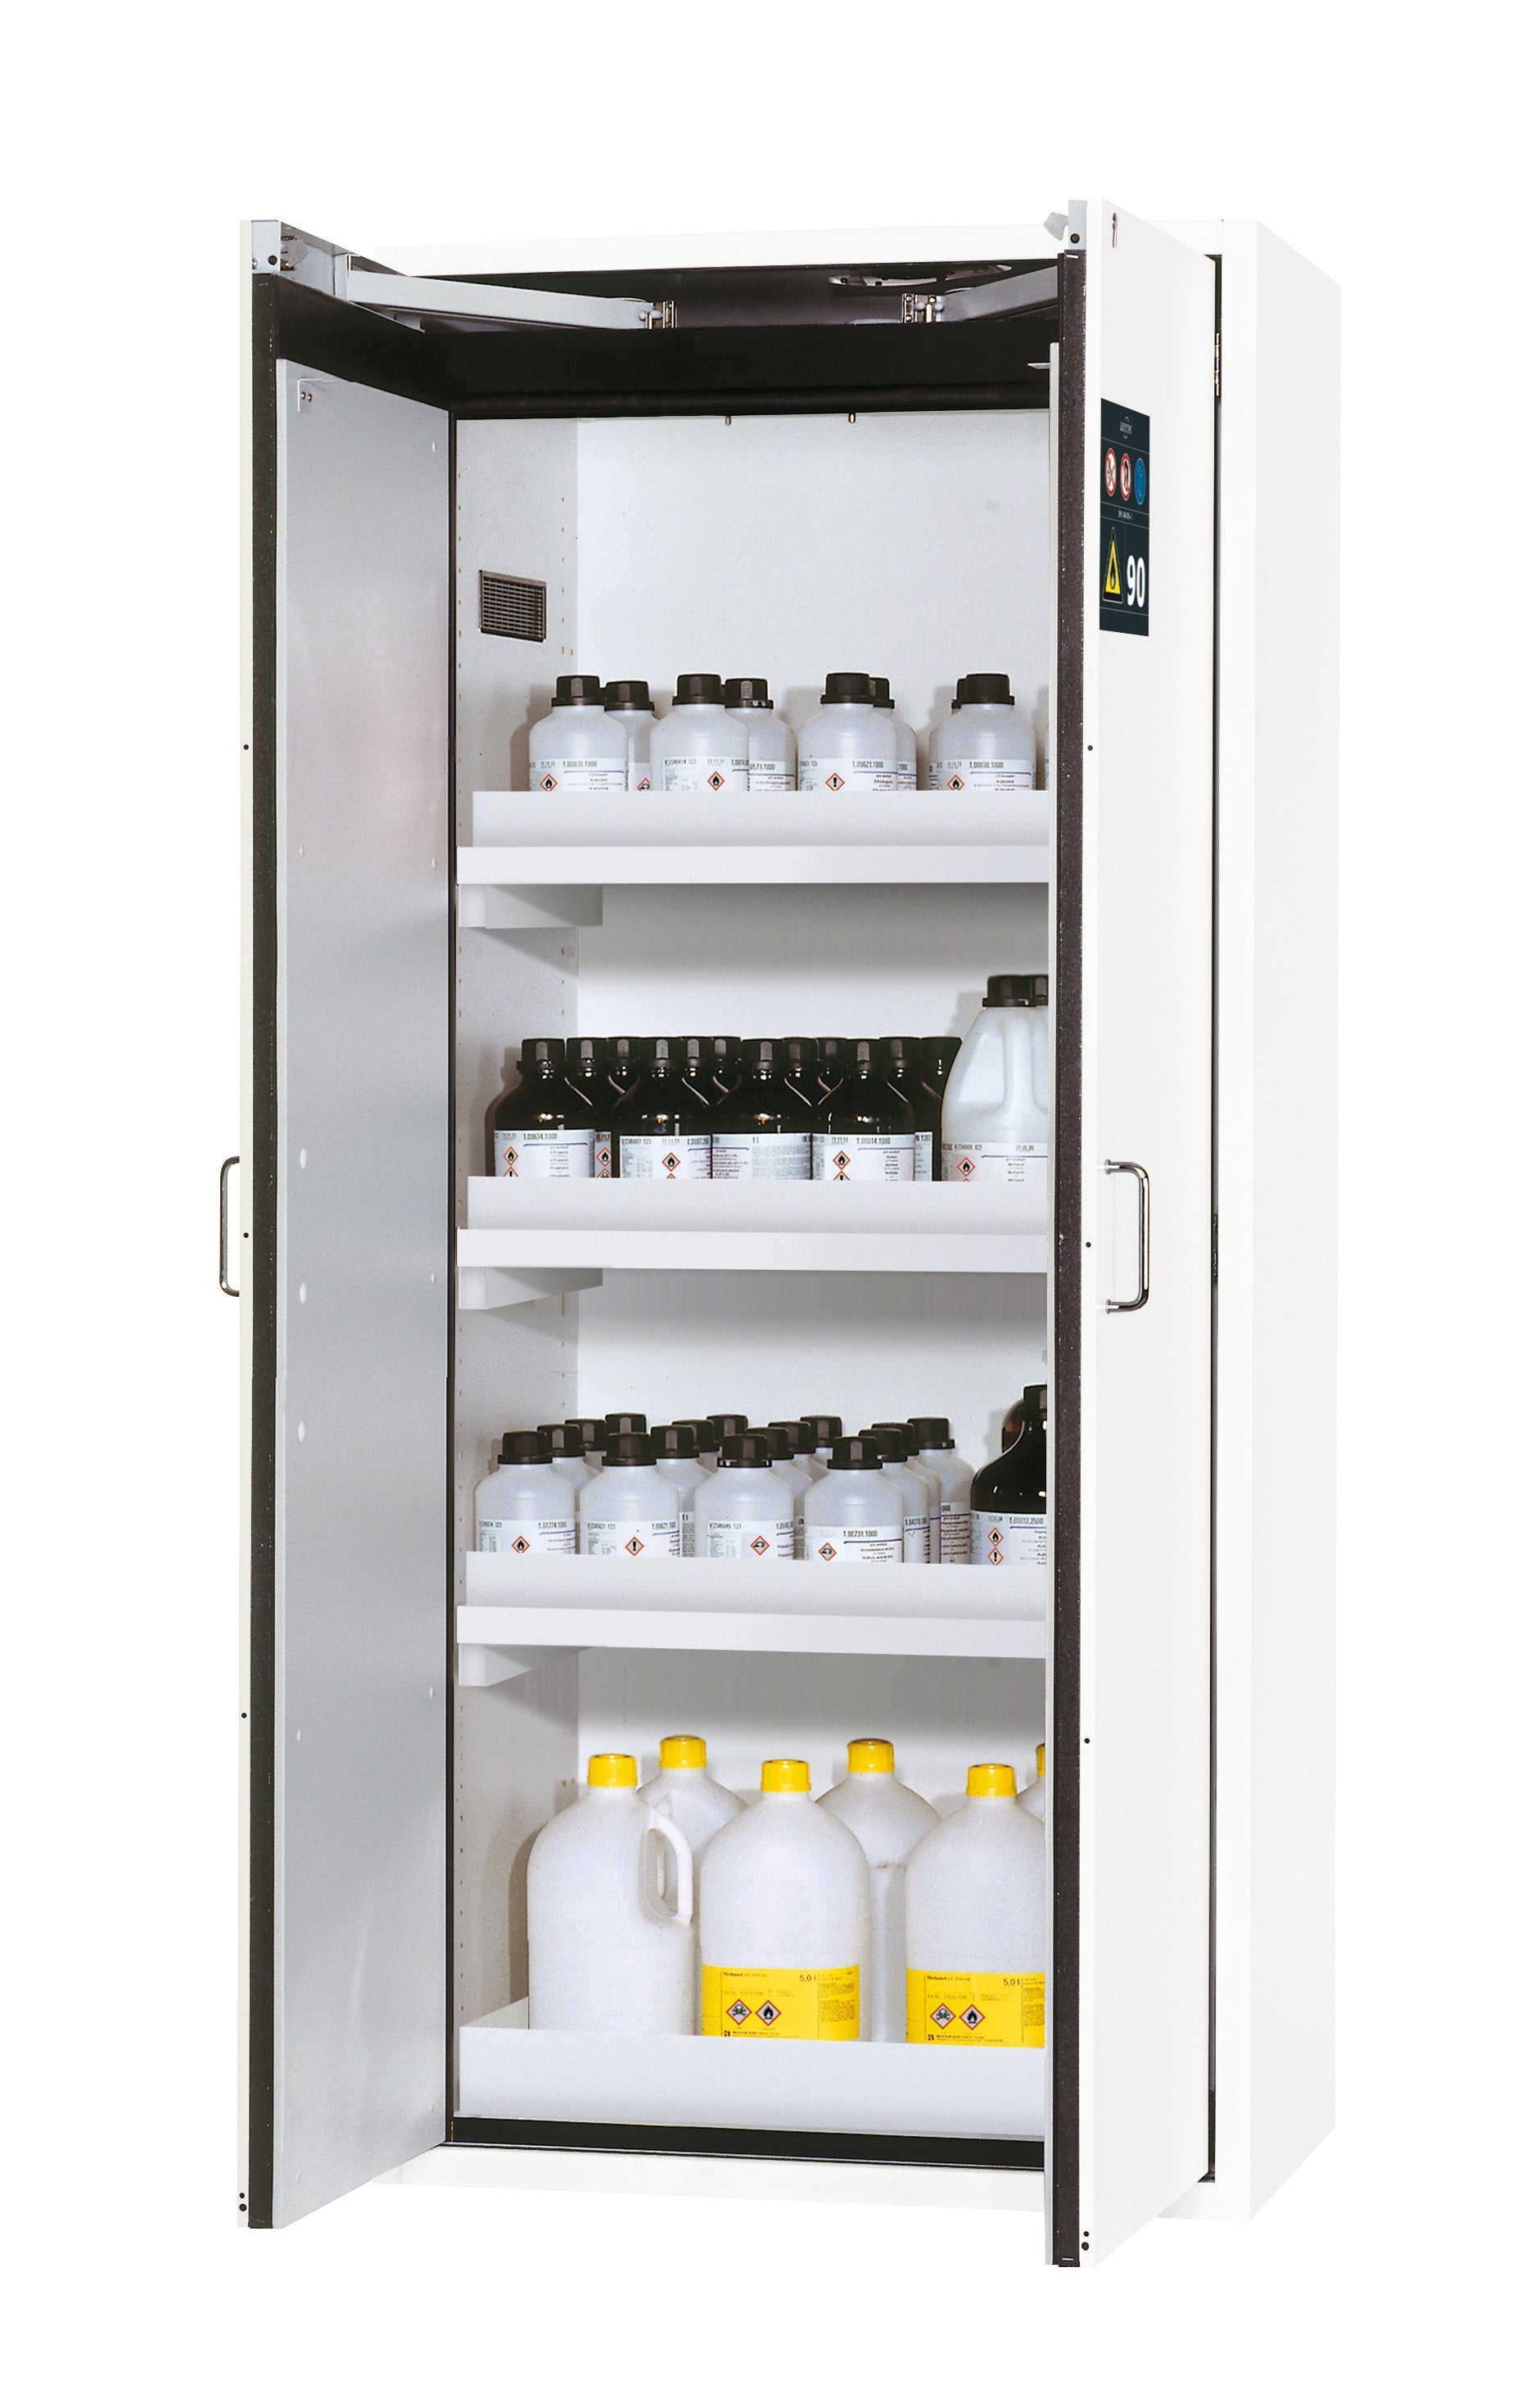 Type 90 safety cabinet S-CLASSIC-90 model S90.196.090.WDAS in laboratory white (similar to RAL 9016) with 3x standard tray base (polypropylene)